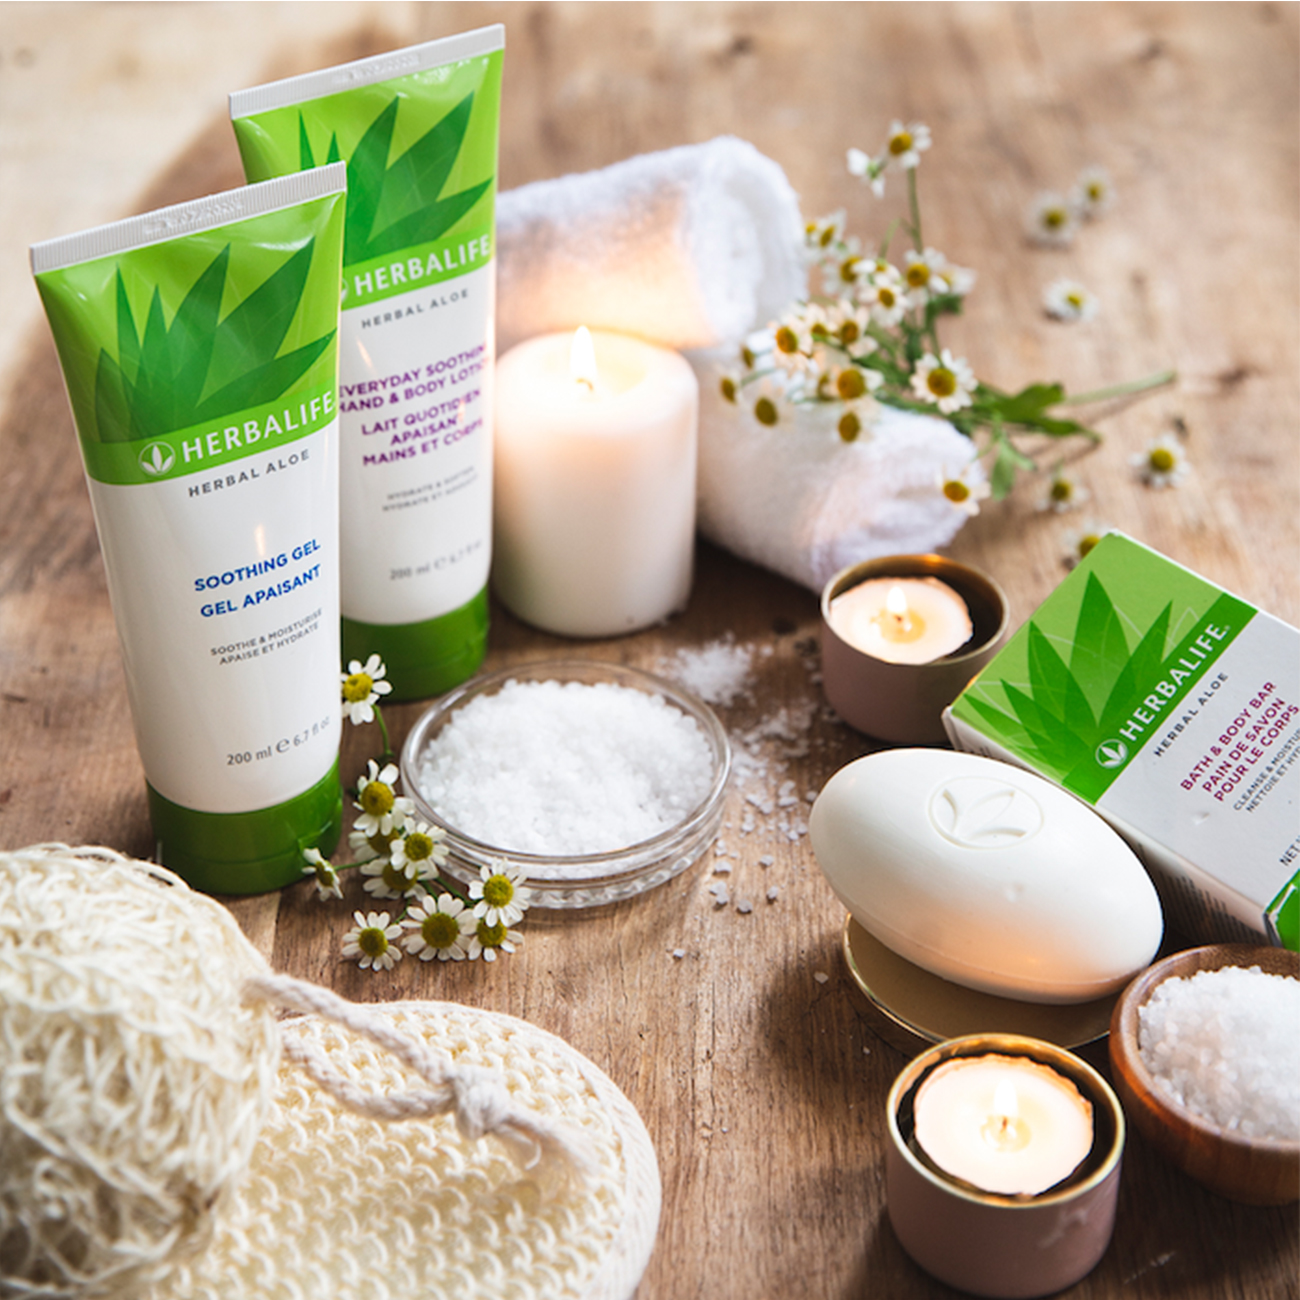 herbal aloe skin and hair products displayed on a wooden table with towels and candles